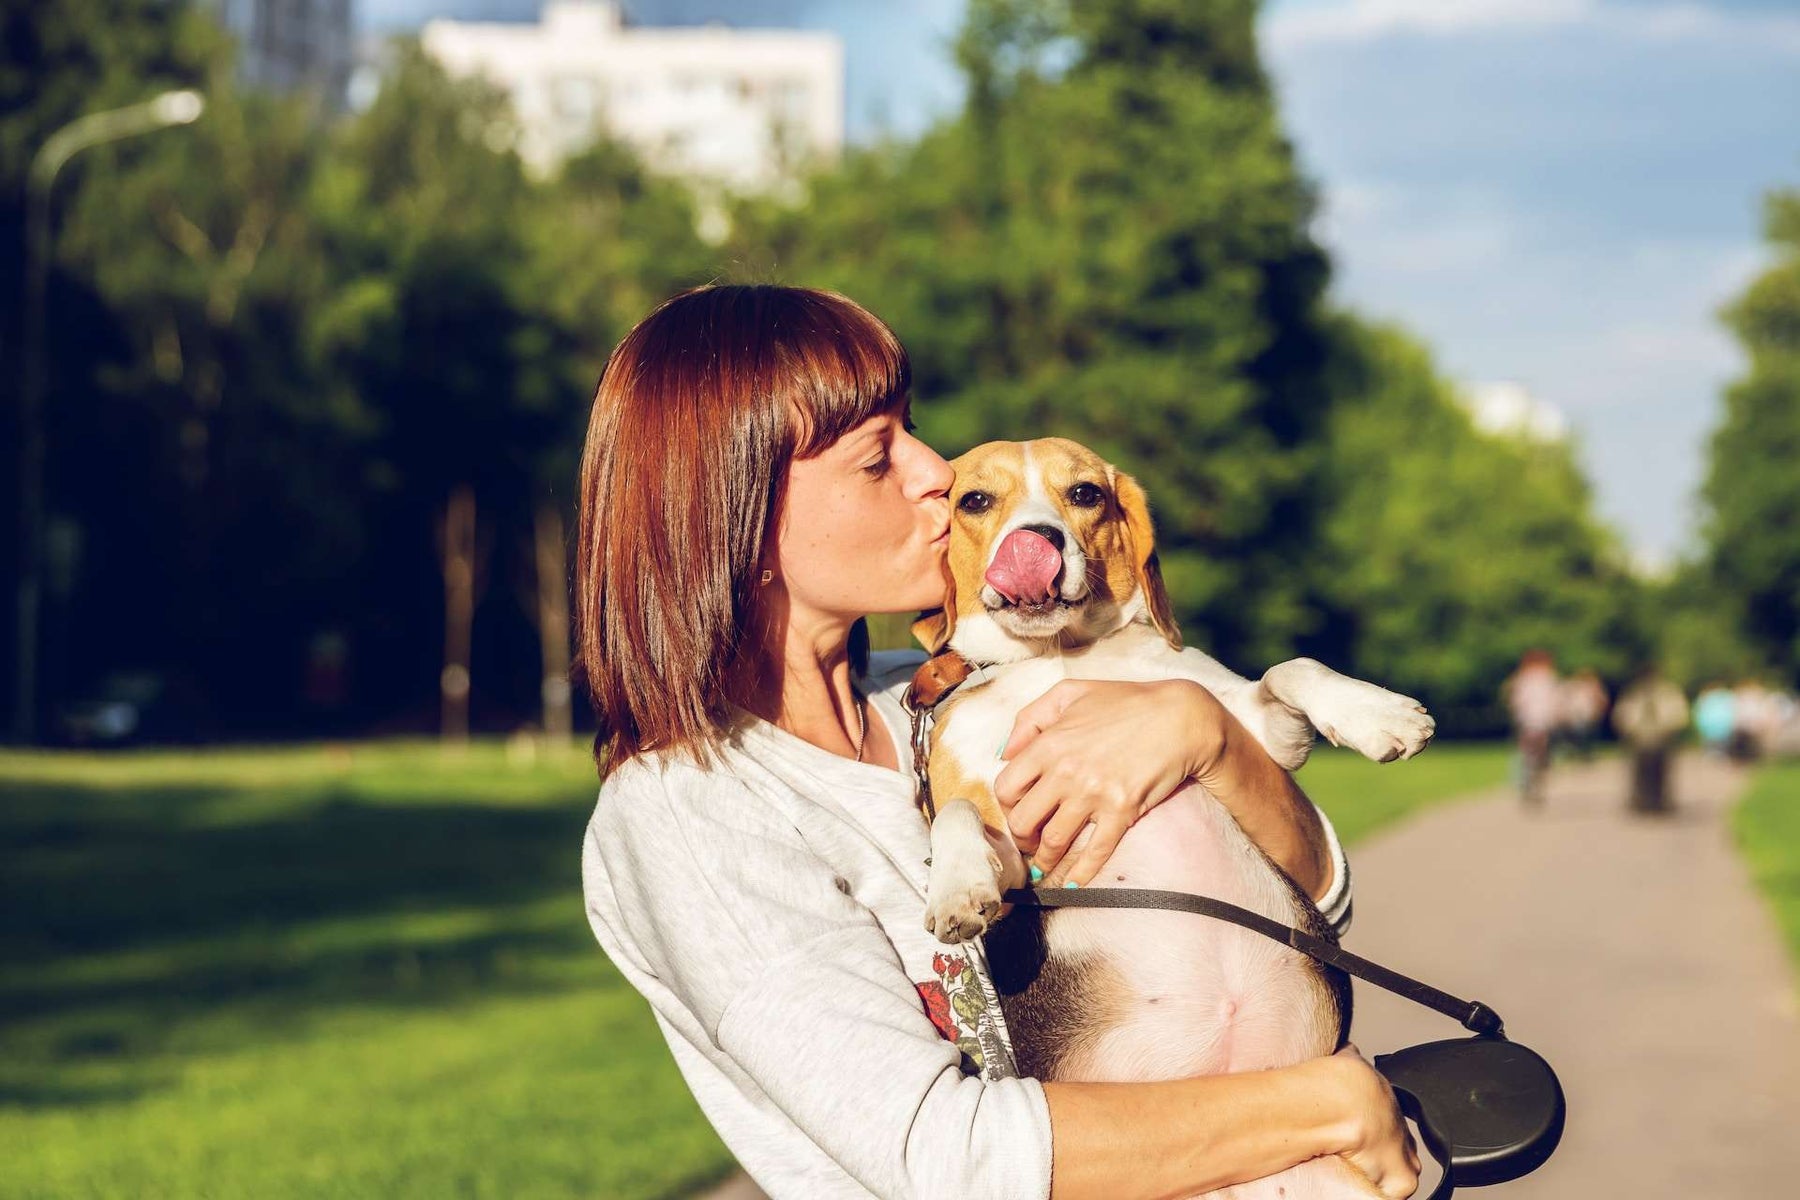 Woman Carrying And Kissing A Beagle Dog